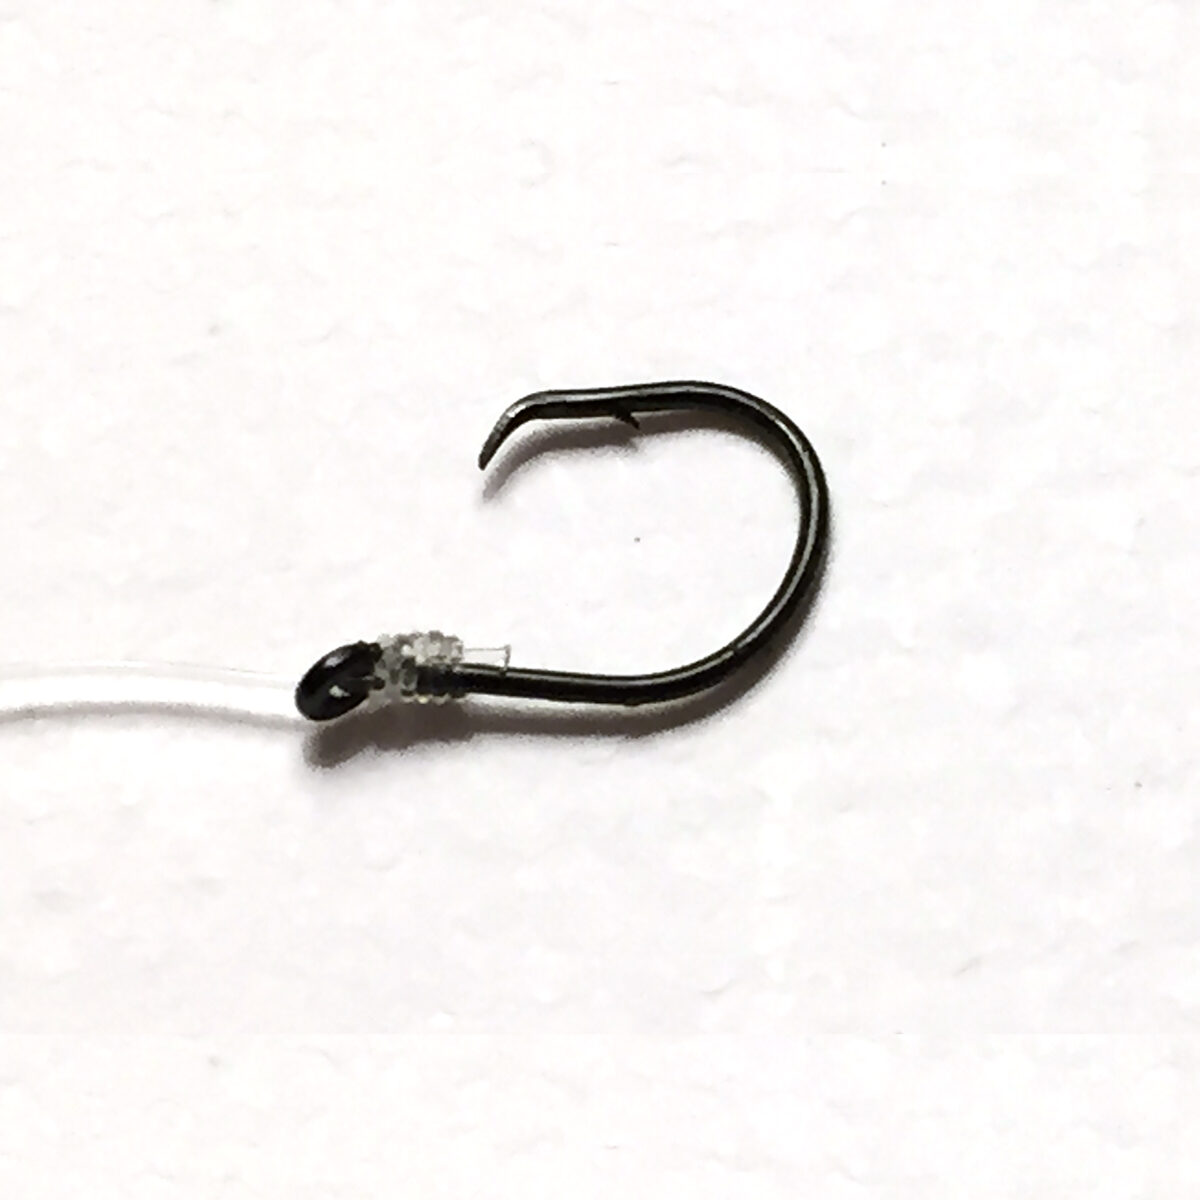 Snelled Circle Hook Eagle Claw